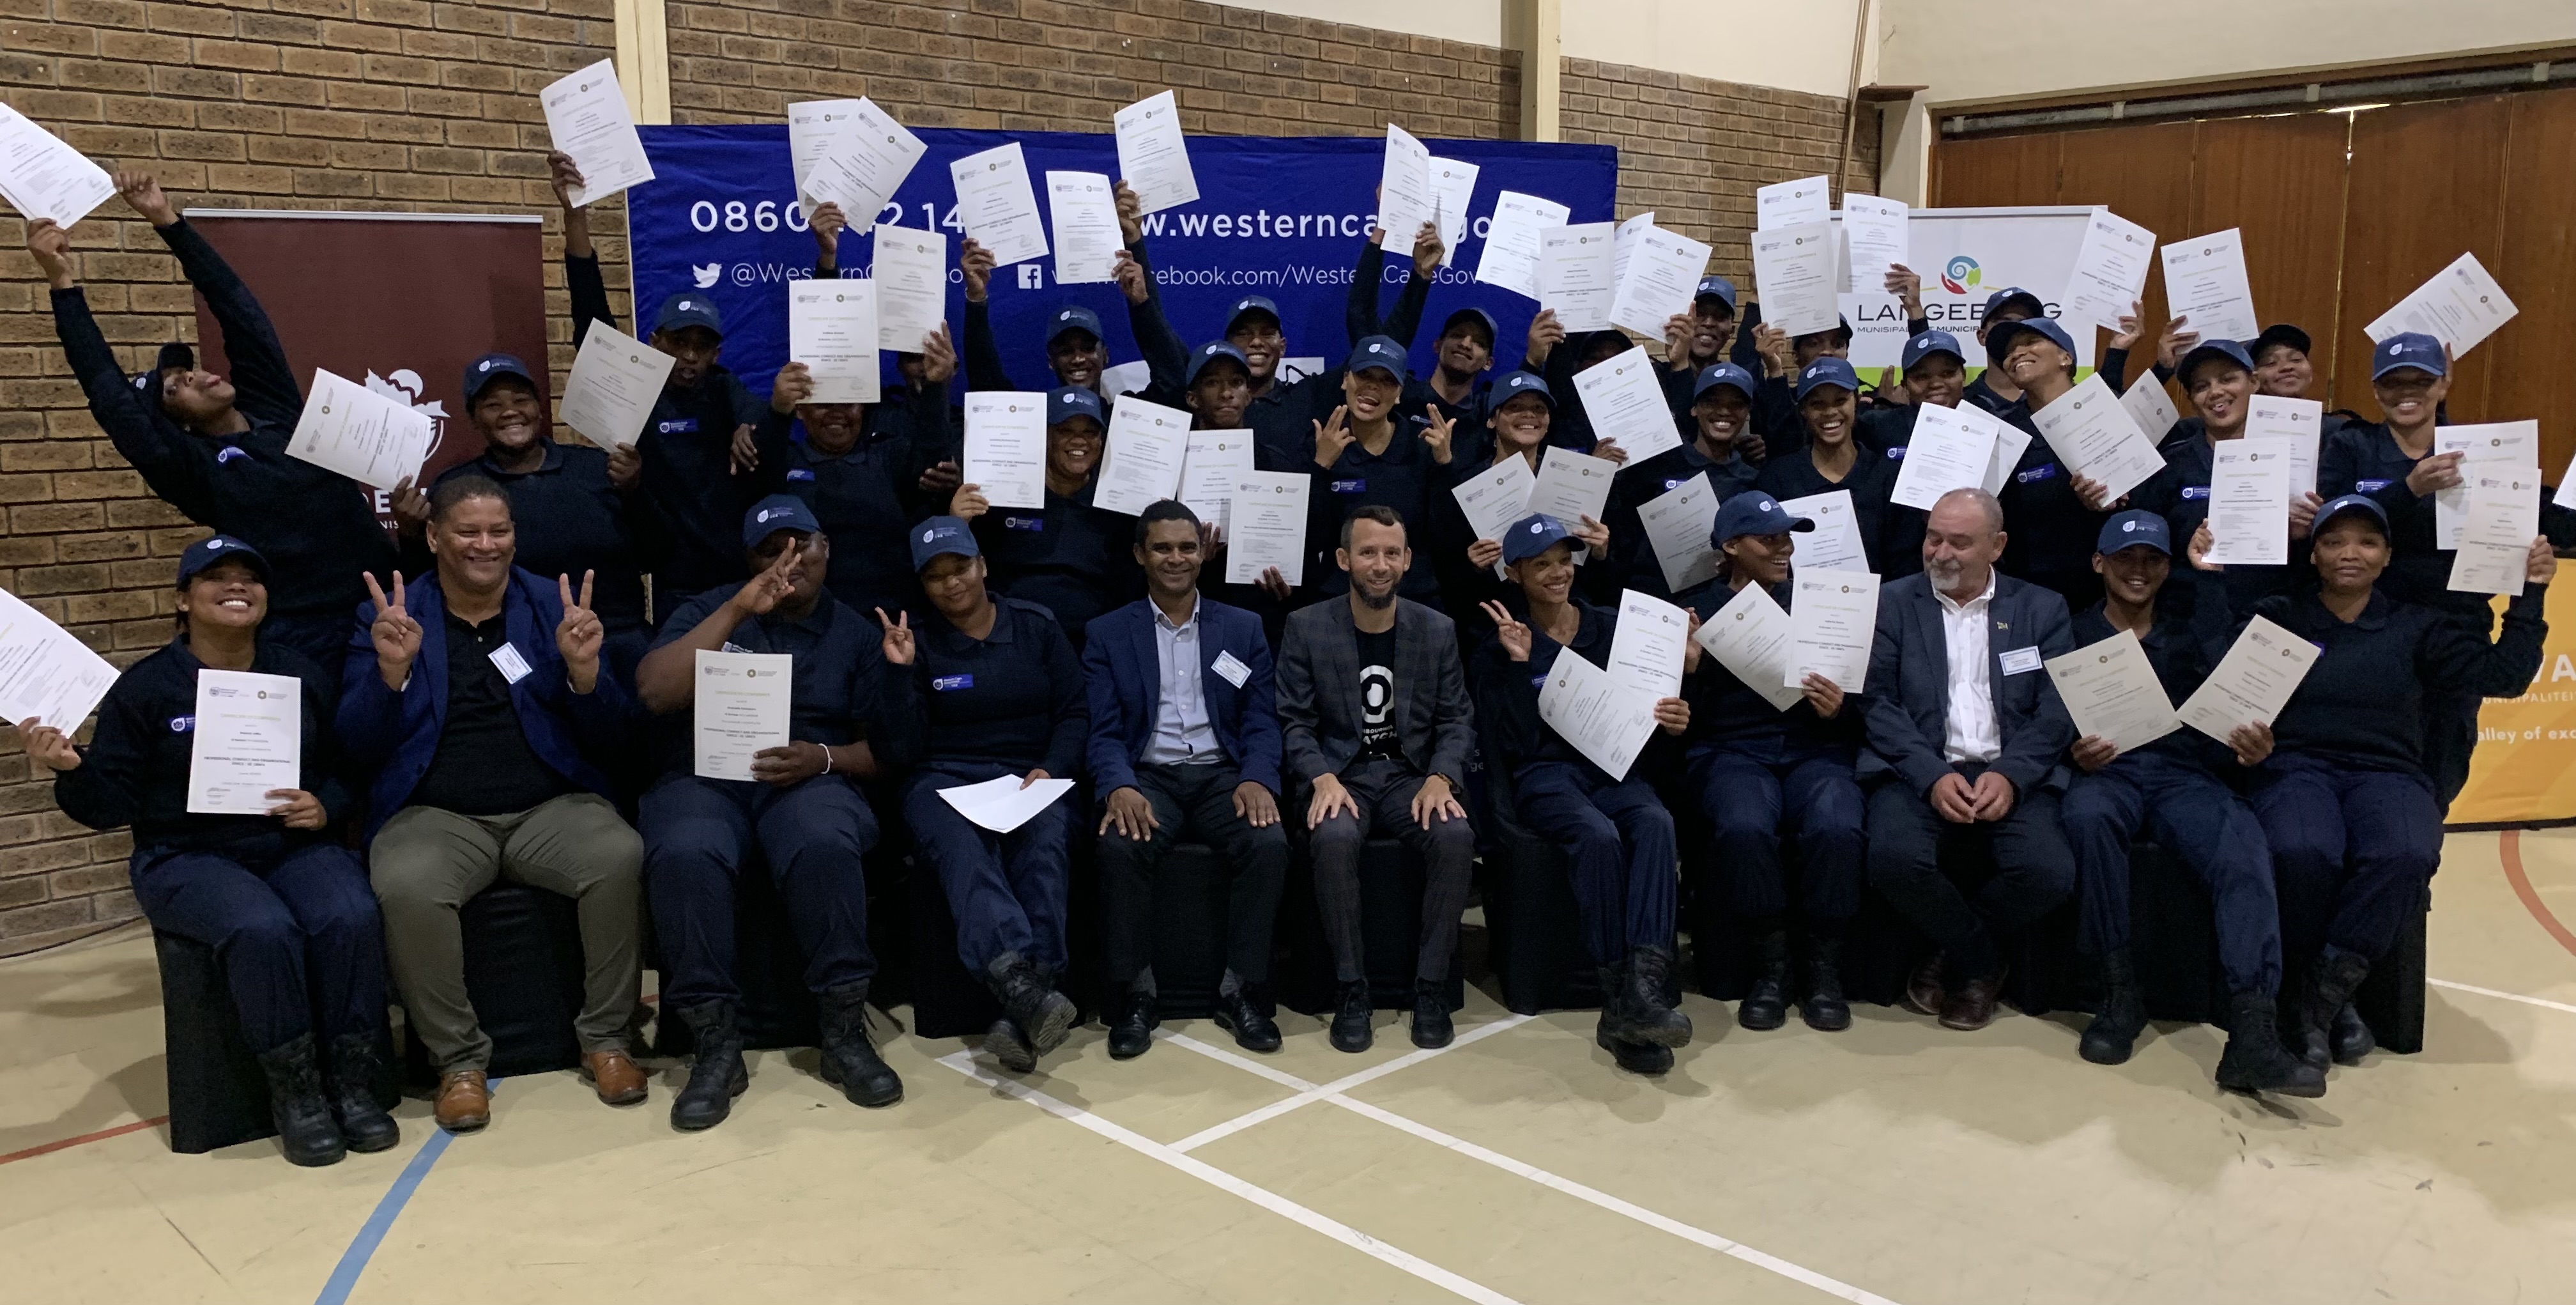 30 Peace Officers to contribute to improving safety in the Breede Valley and Langeberg areas.